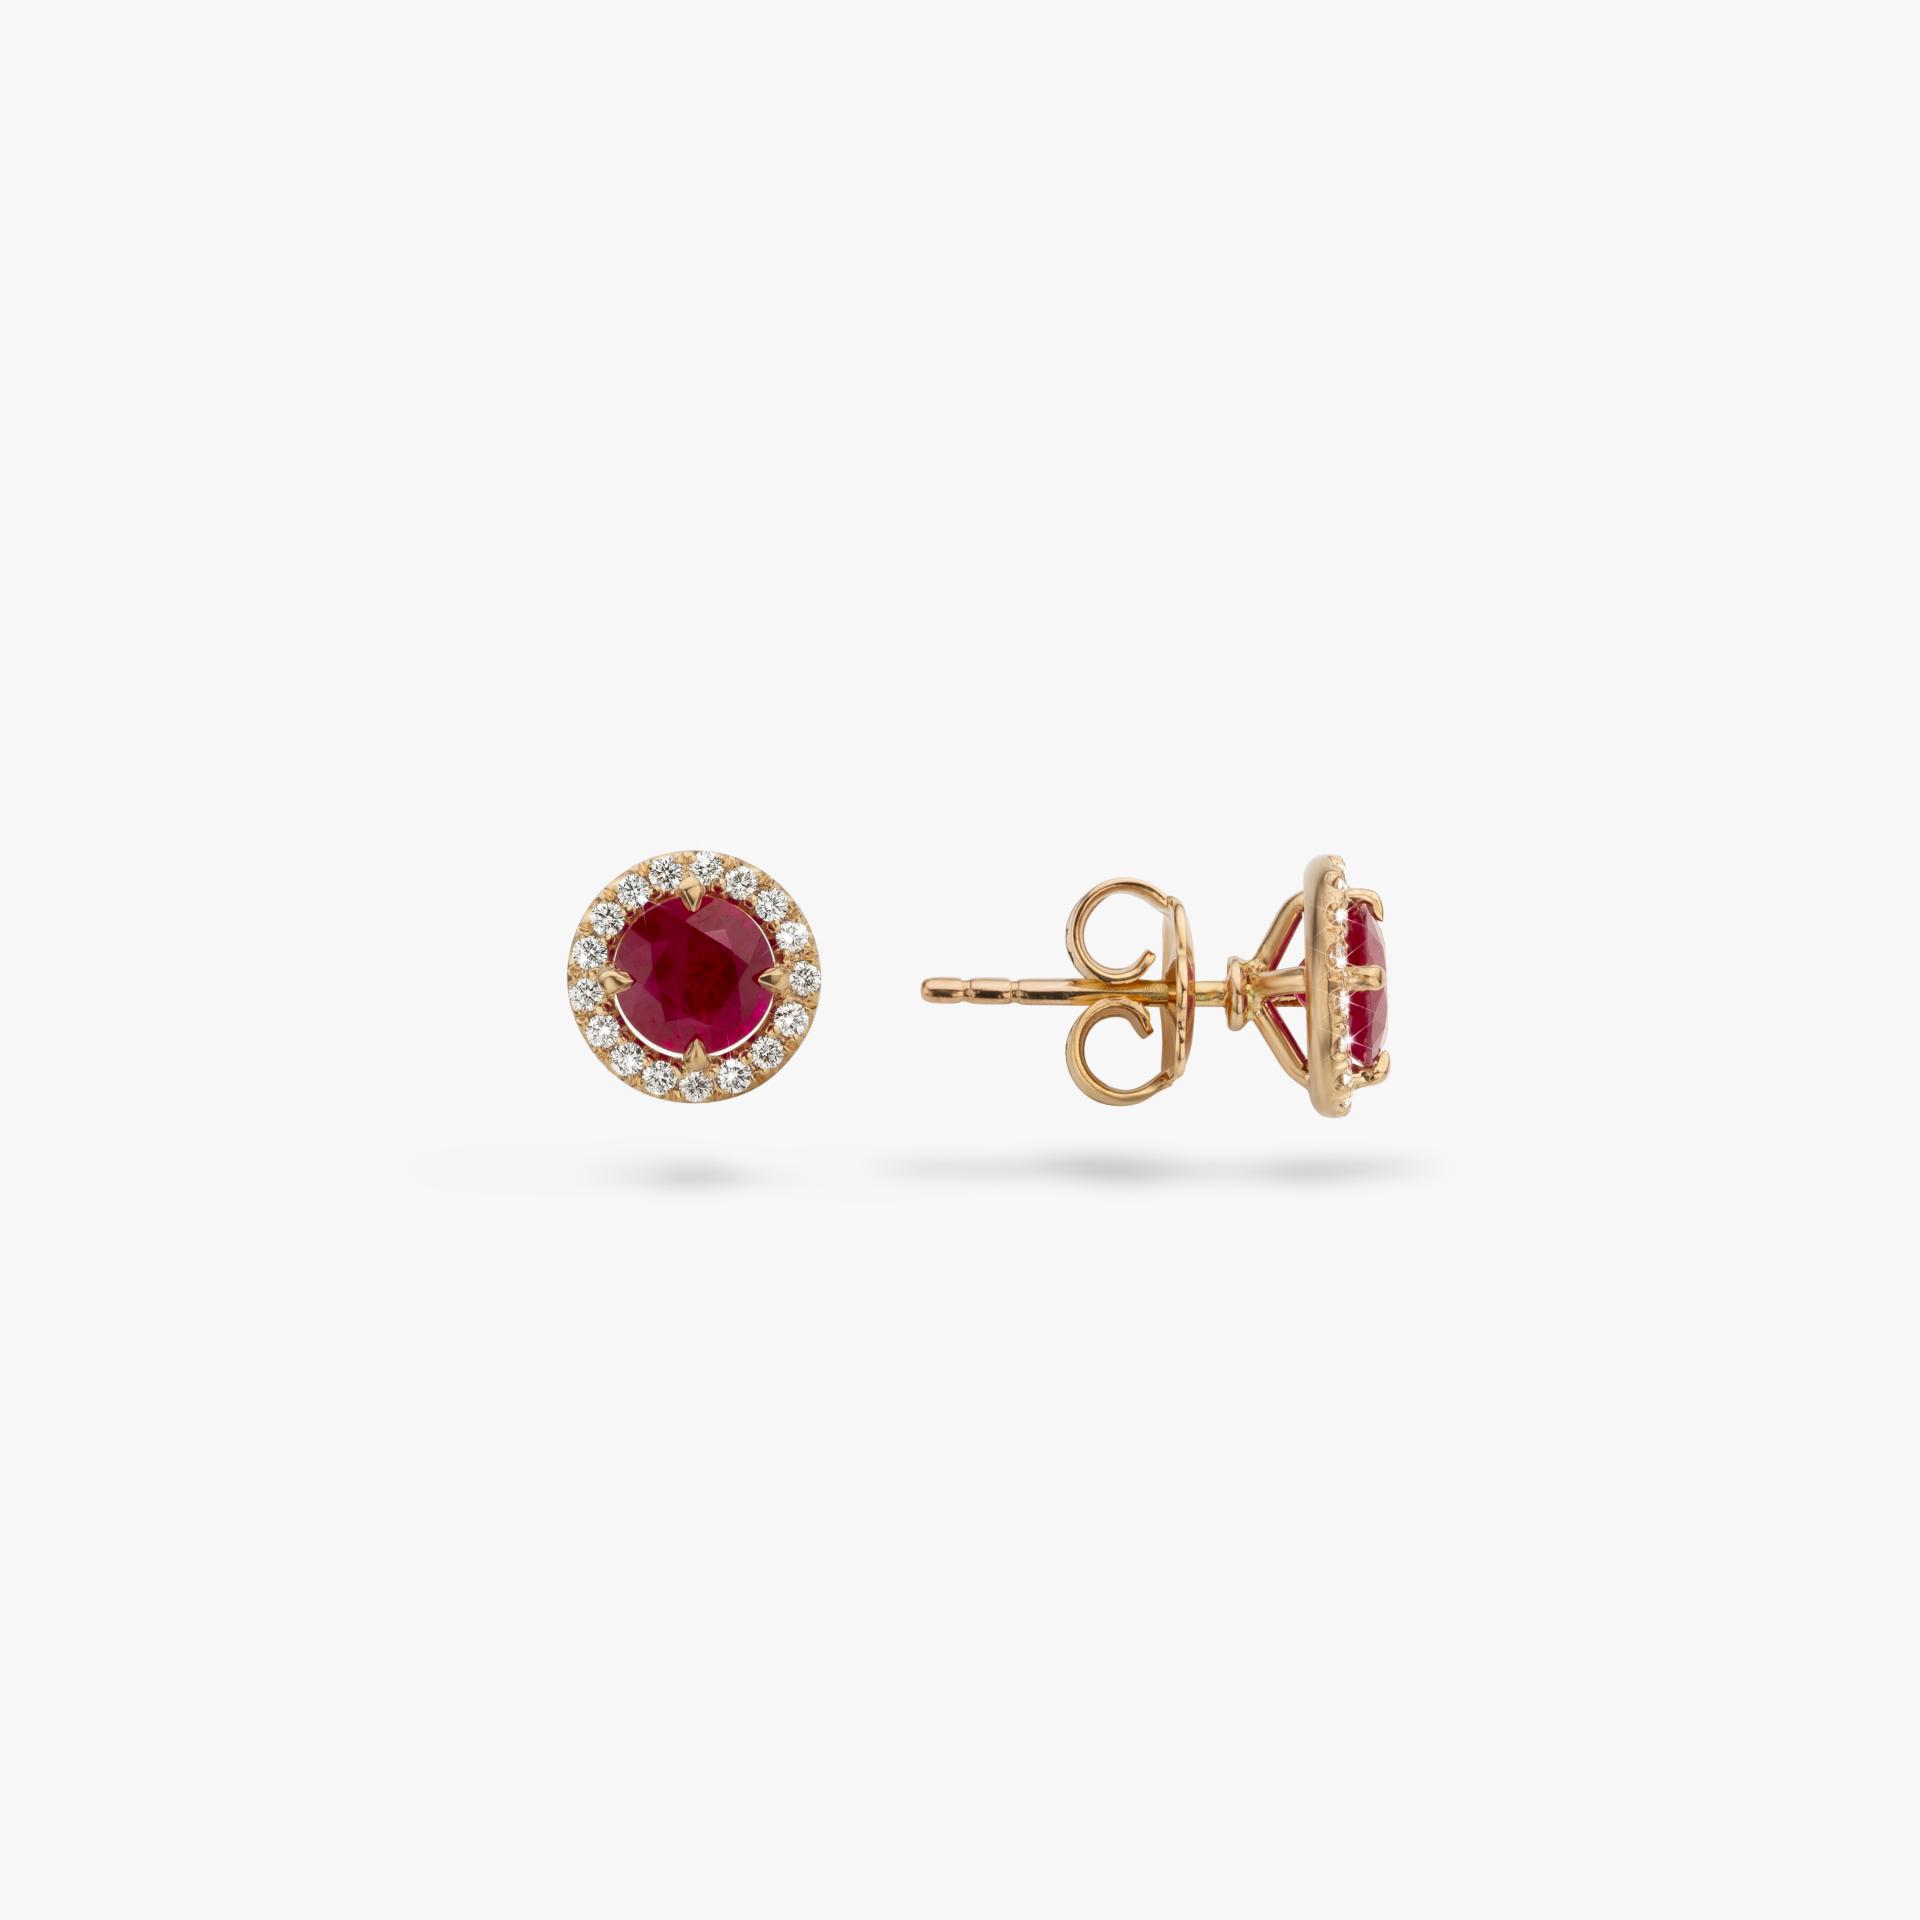 Rose gold earrings set with rubies and brilliant cut diamonds made by Maison De Greef